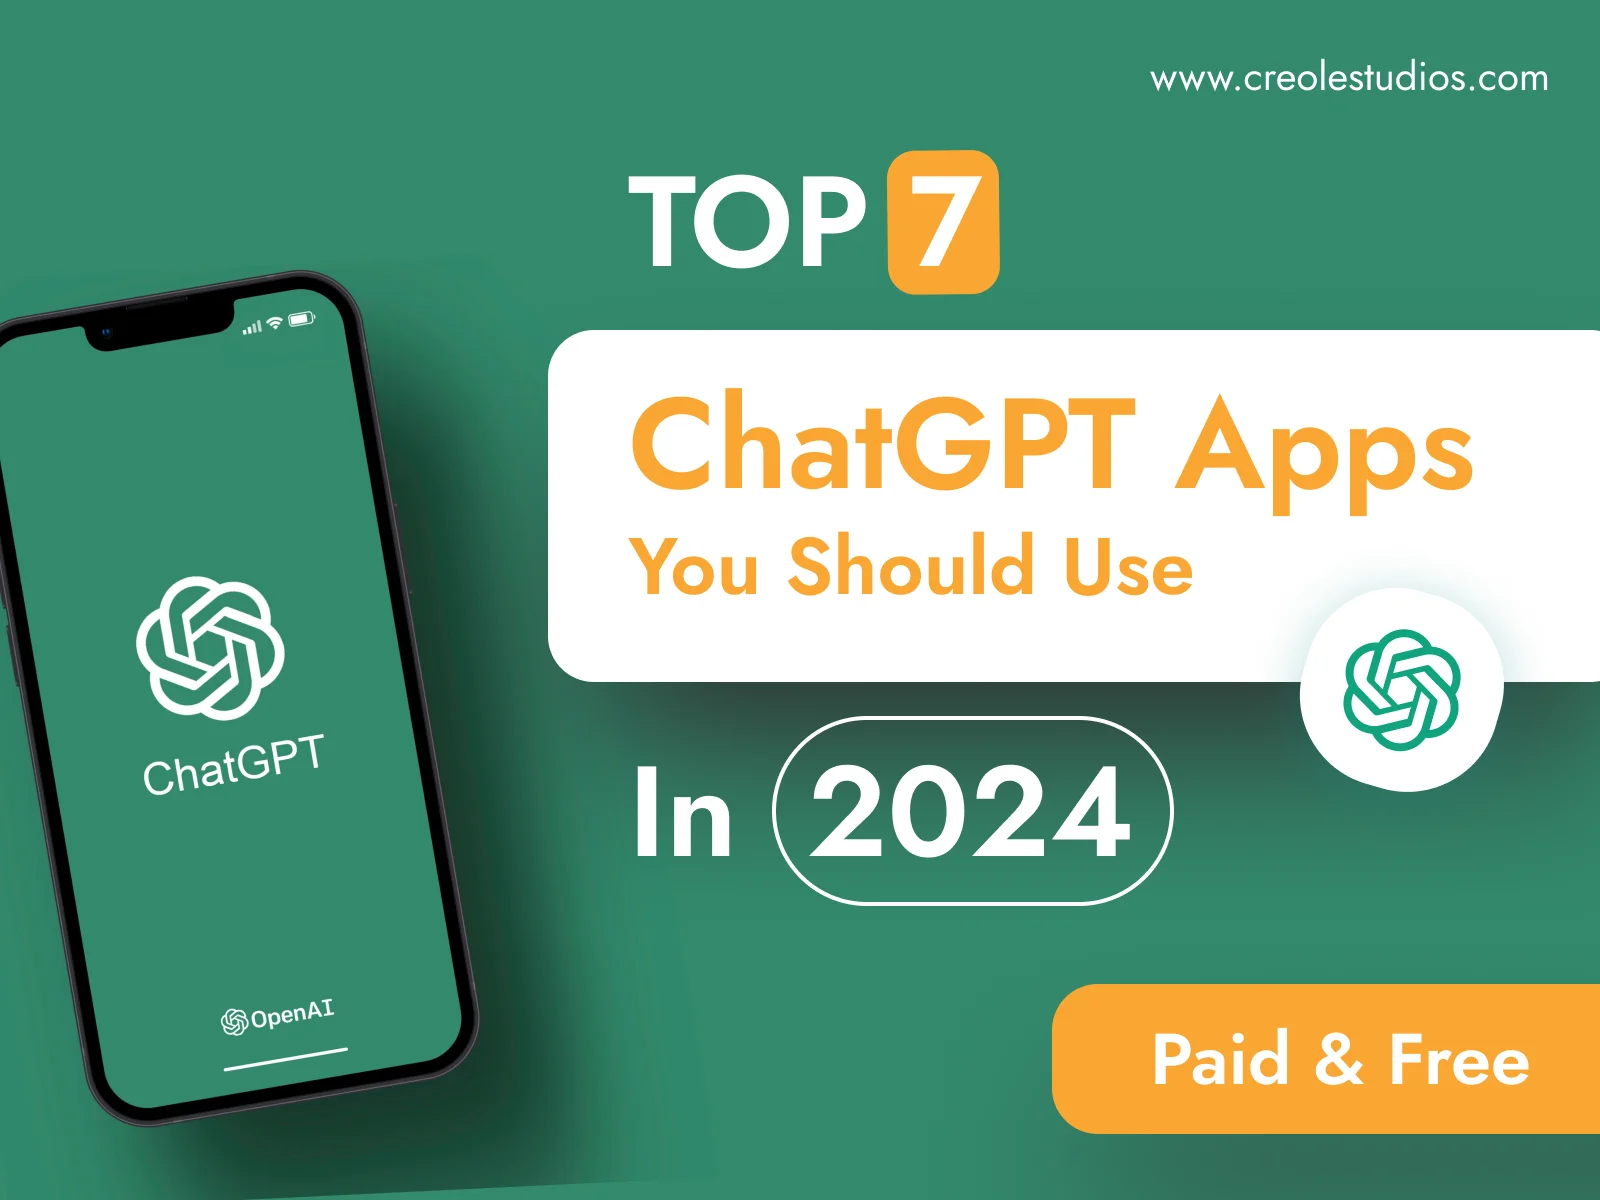 Top 7 ChatGPT Apps You Should Use in 2024 (Paid & Free)